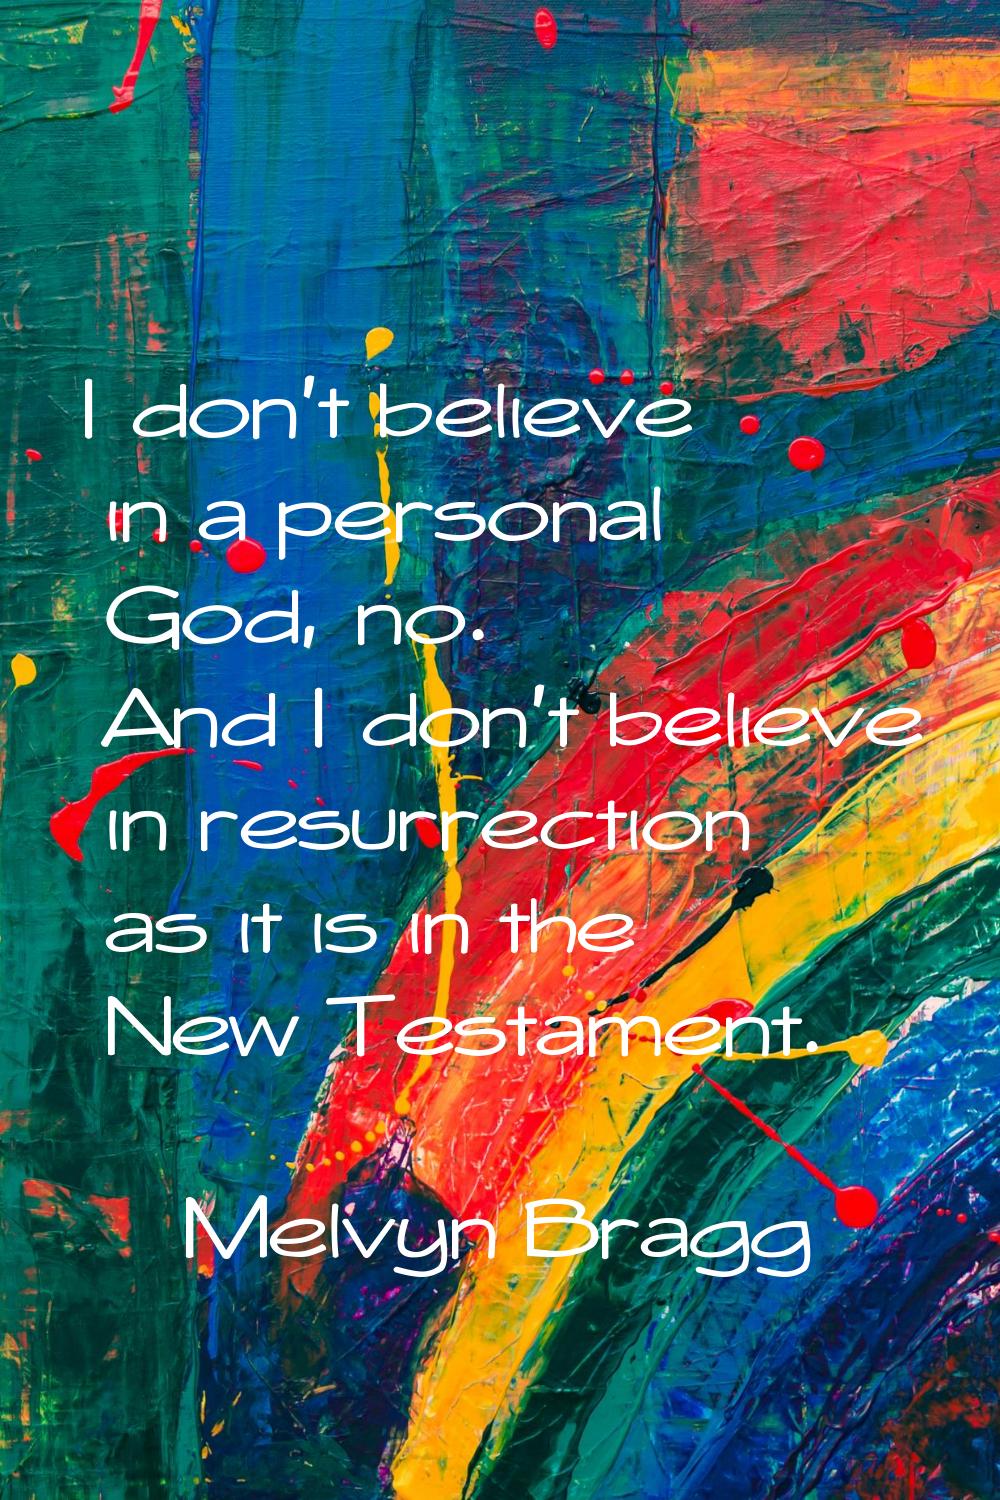 I don't believe in a personal God, no. And I don't believe in resurrection as it is in the New Test